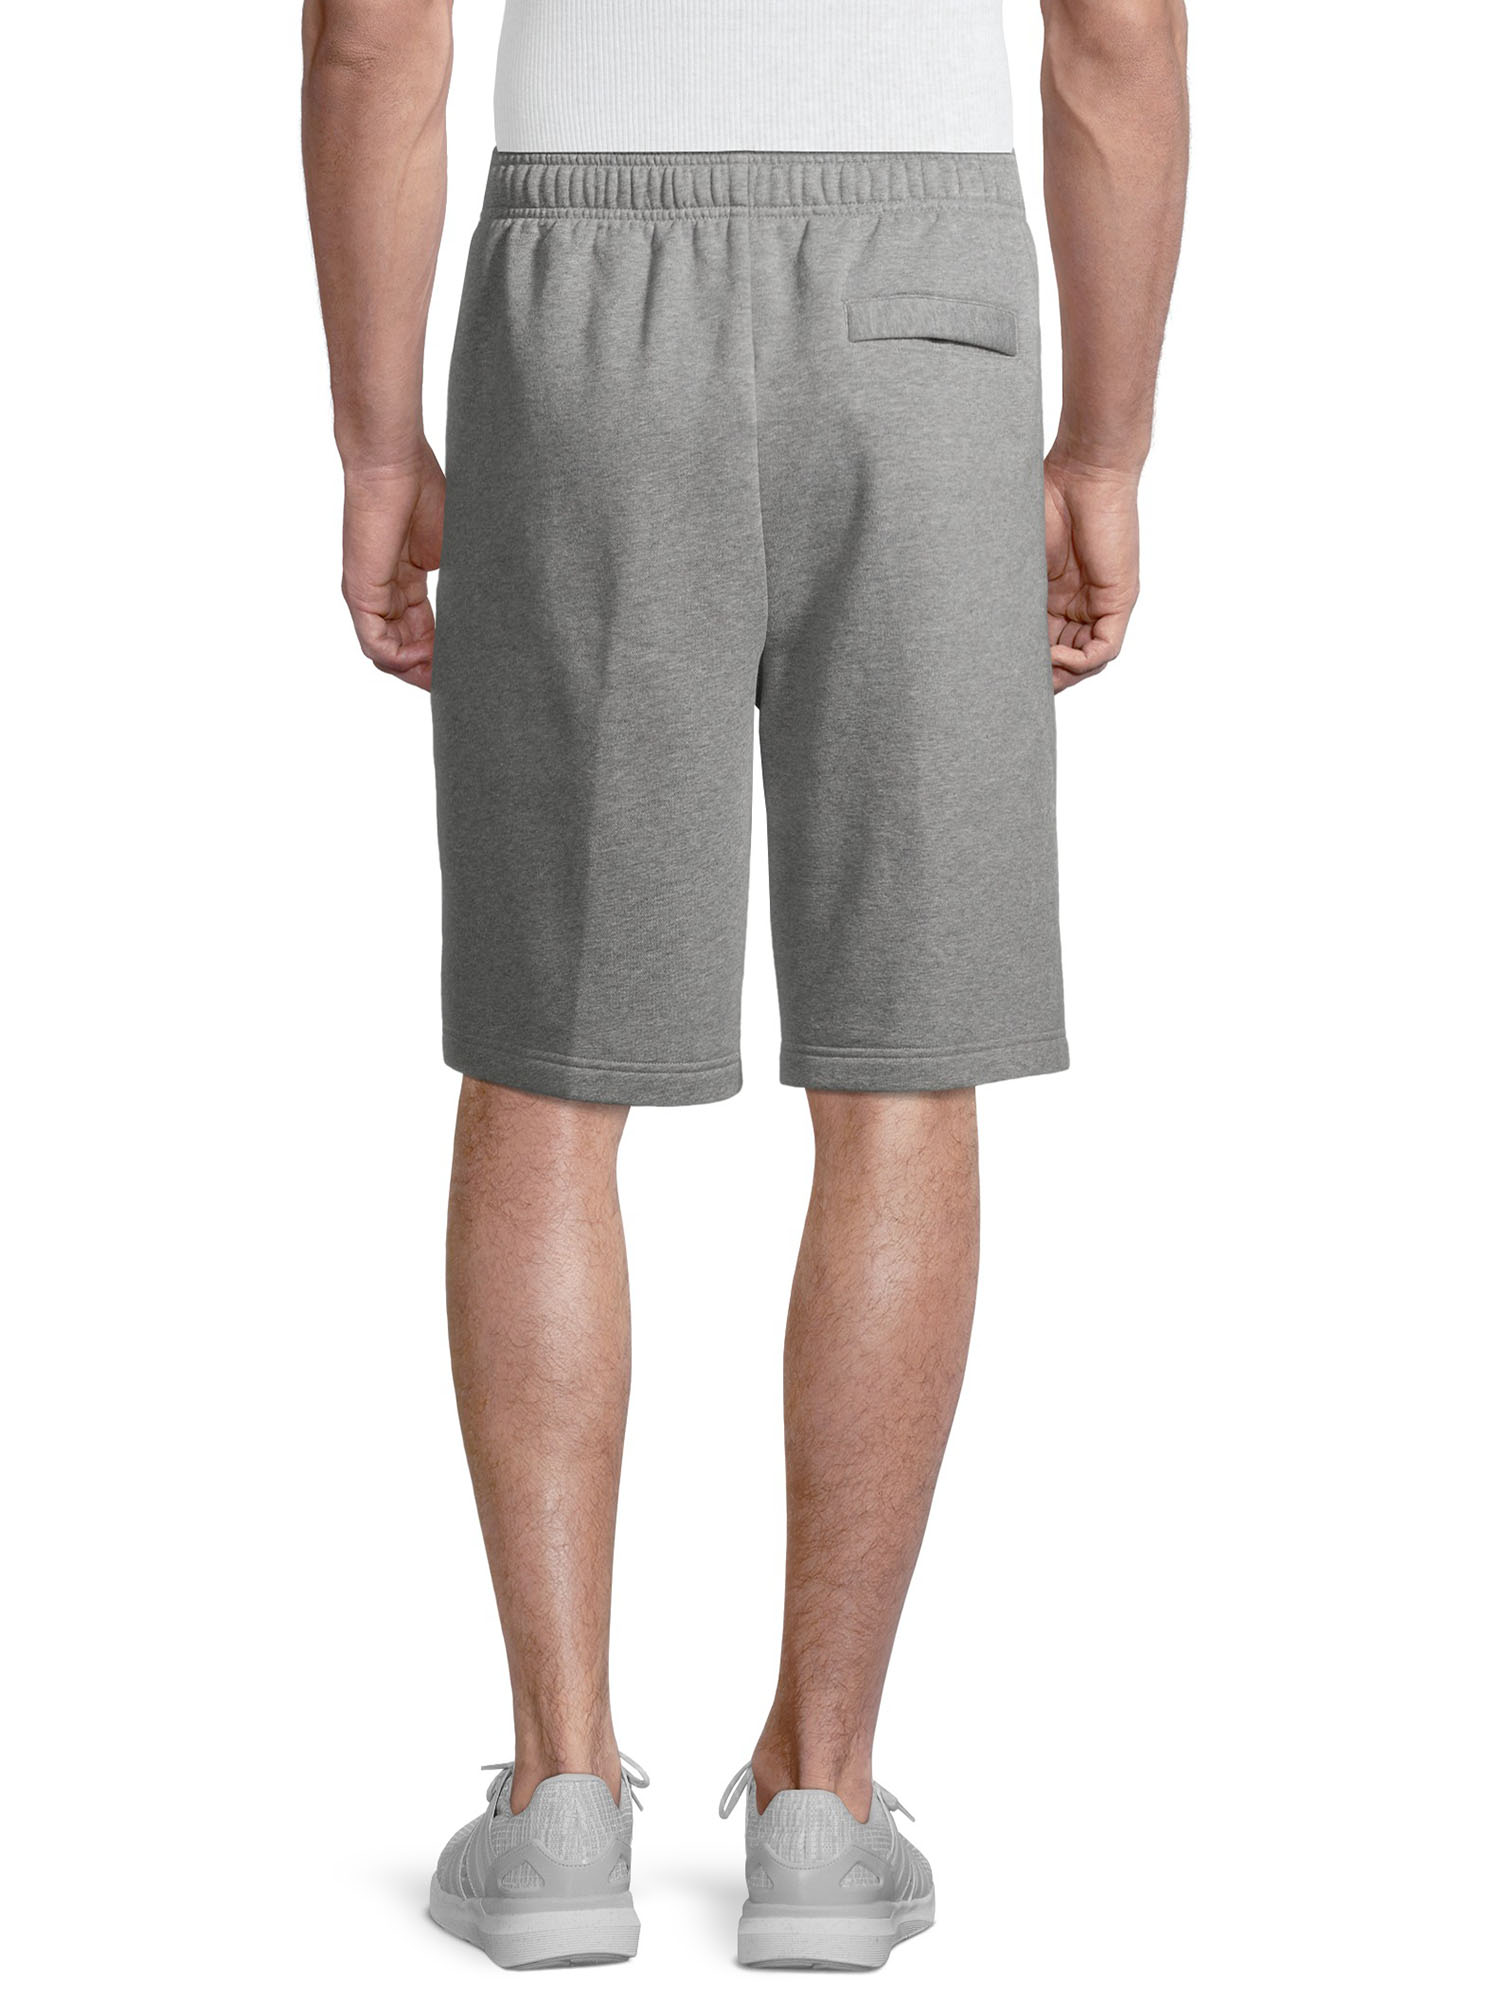 Athletic Works Men's and Big Men's Active Fleece Short, up to Size 5XL - image 3 of 6